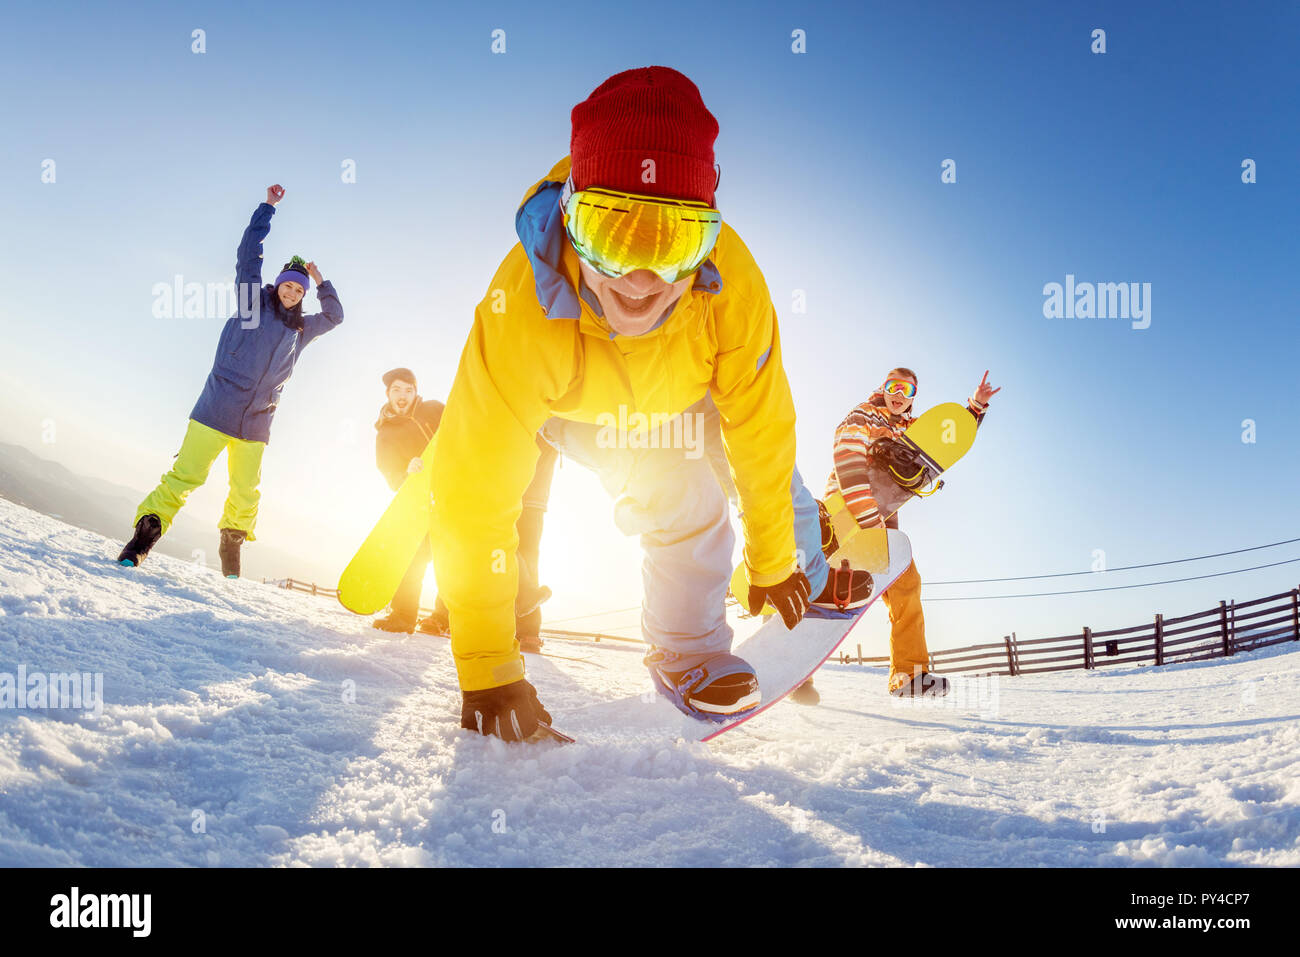 Funny photo with with friends at ski resort. Snowboarders are having fun in playful poses Stock Photo